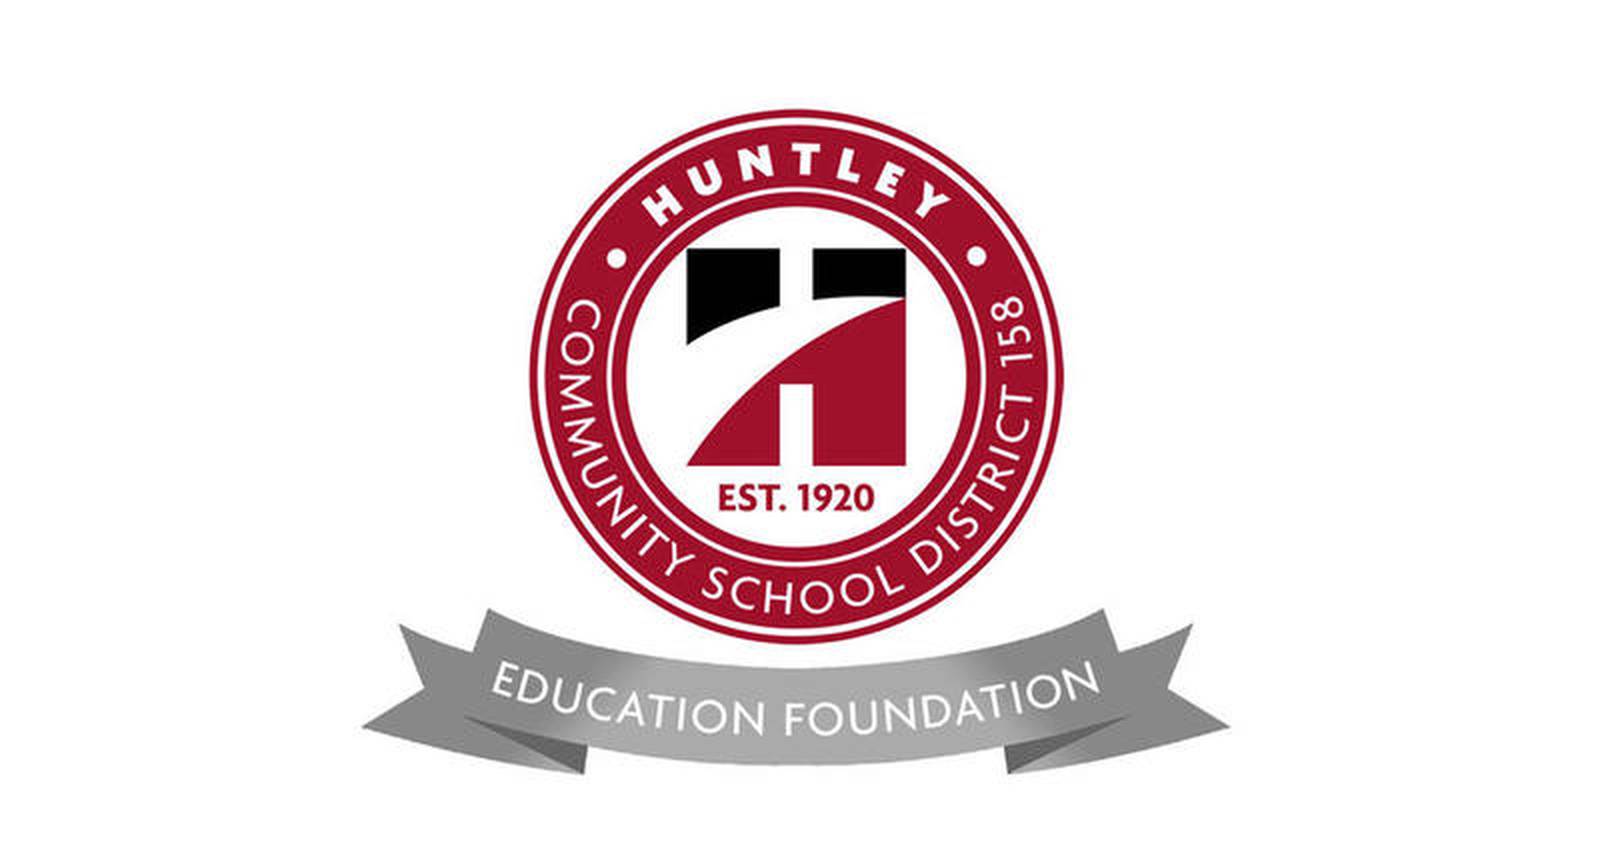 Class of 2020 students receive $13 000 in scholarships from Huntley